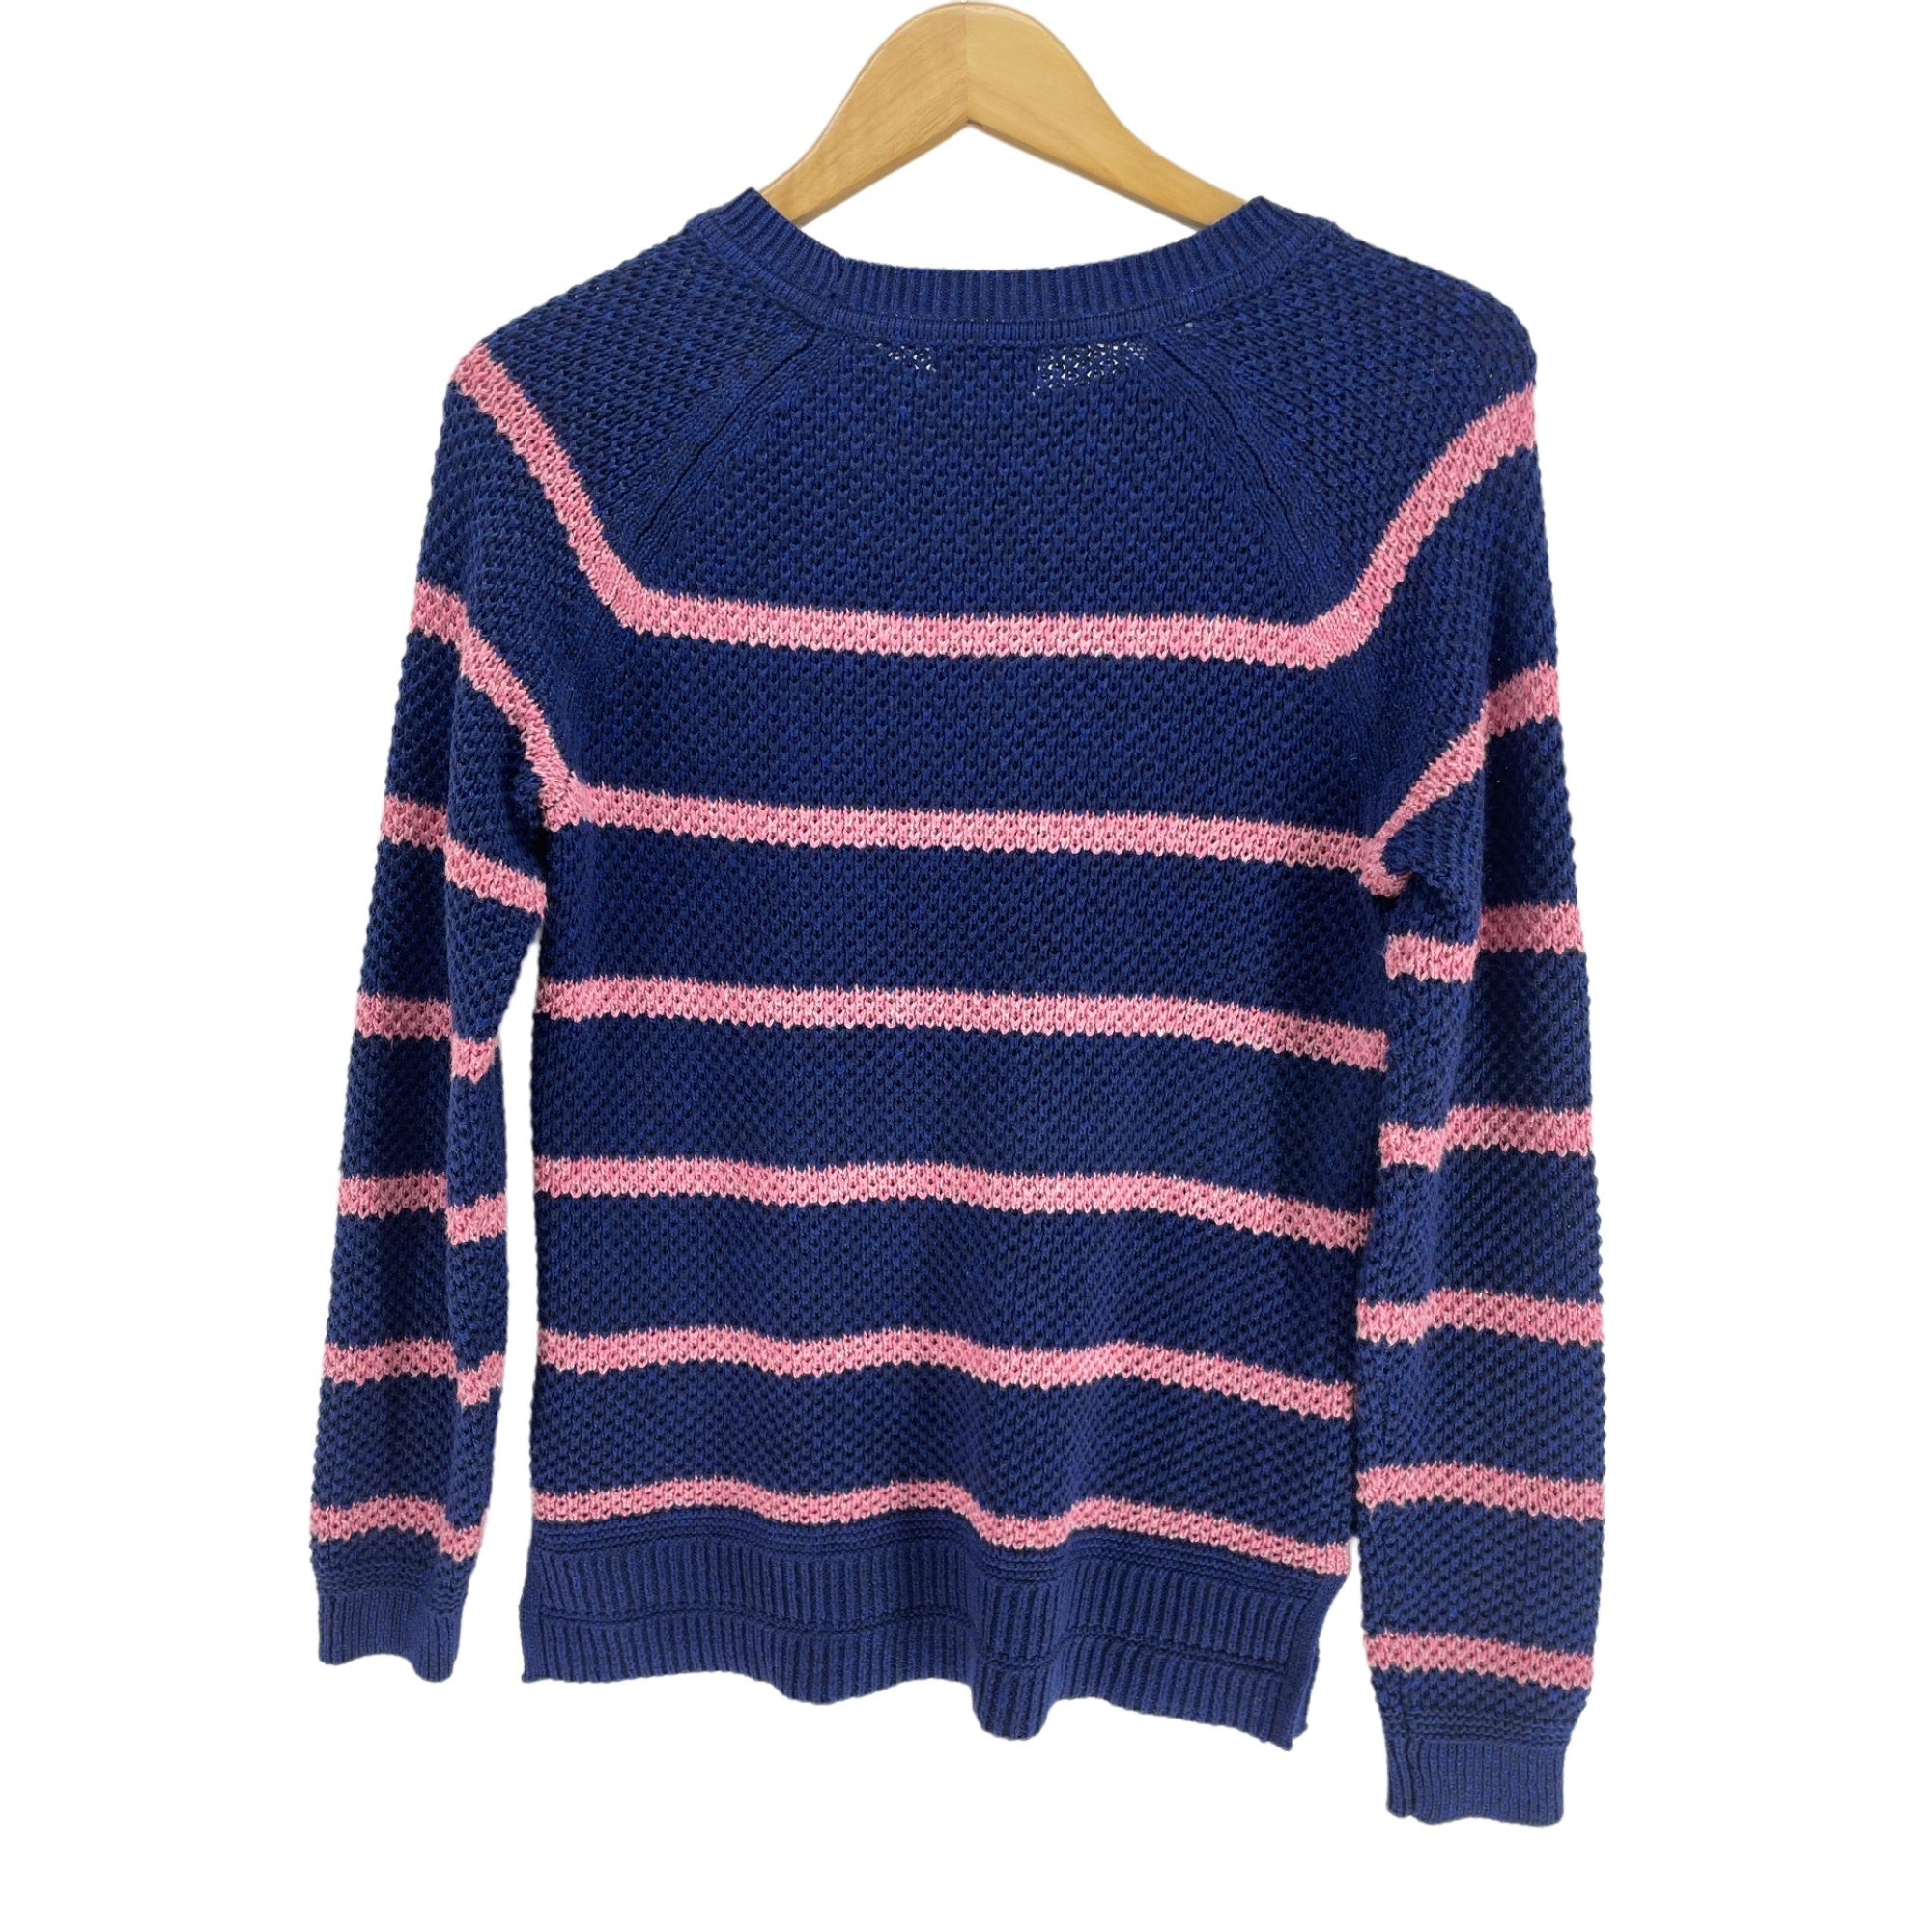 Old Navy Small Blue and Pink Striped Crew Neck Sweater